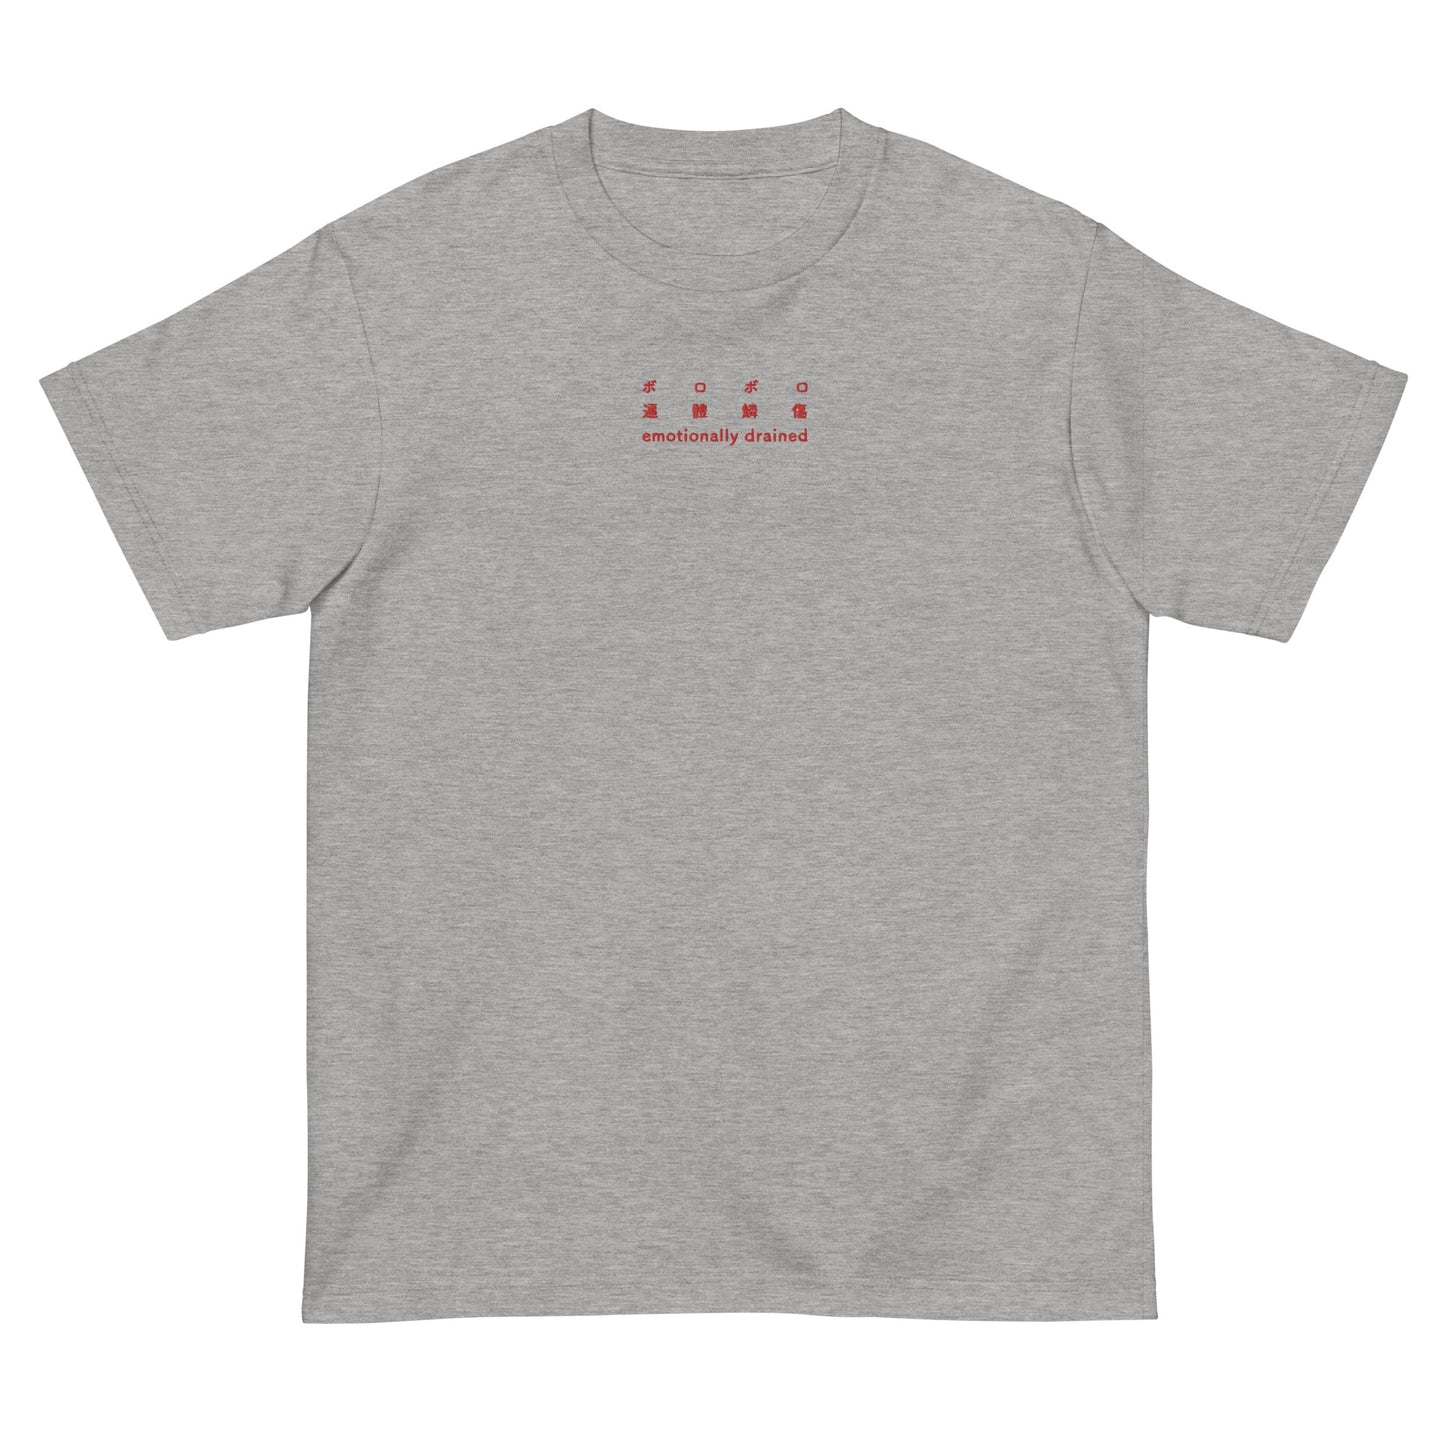 Light Gray High Quality Tee - Front Design with an Red Embroidery "emotionally drained" in three languages